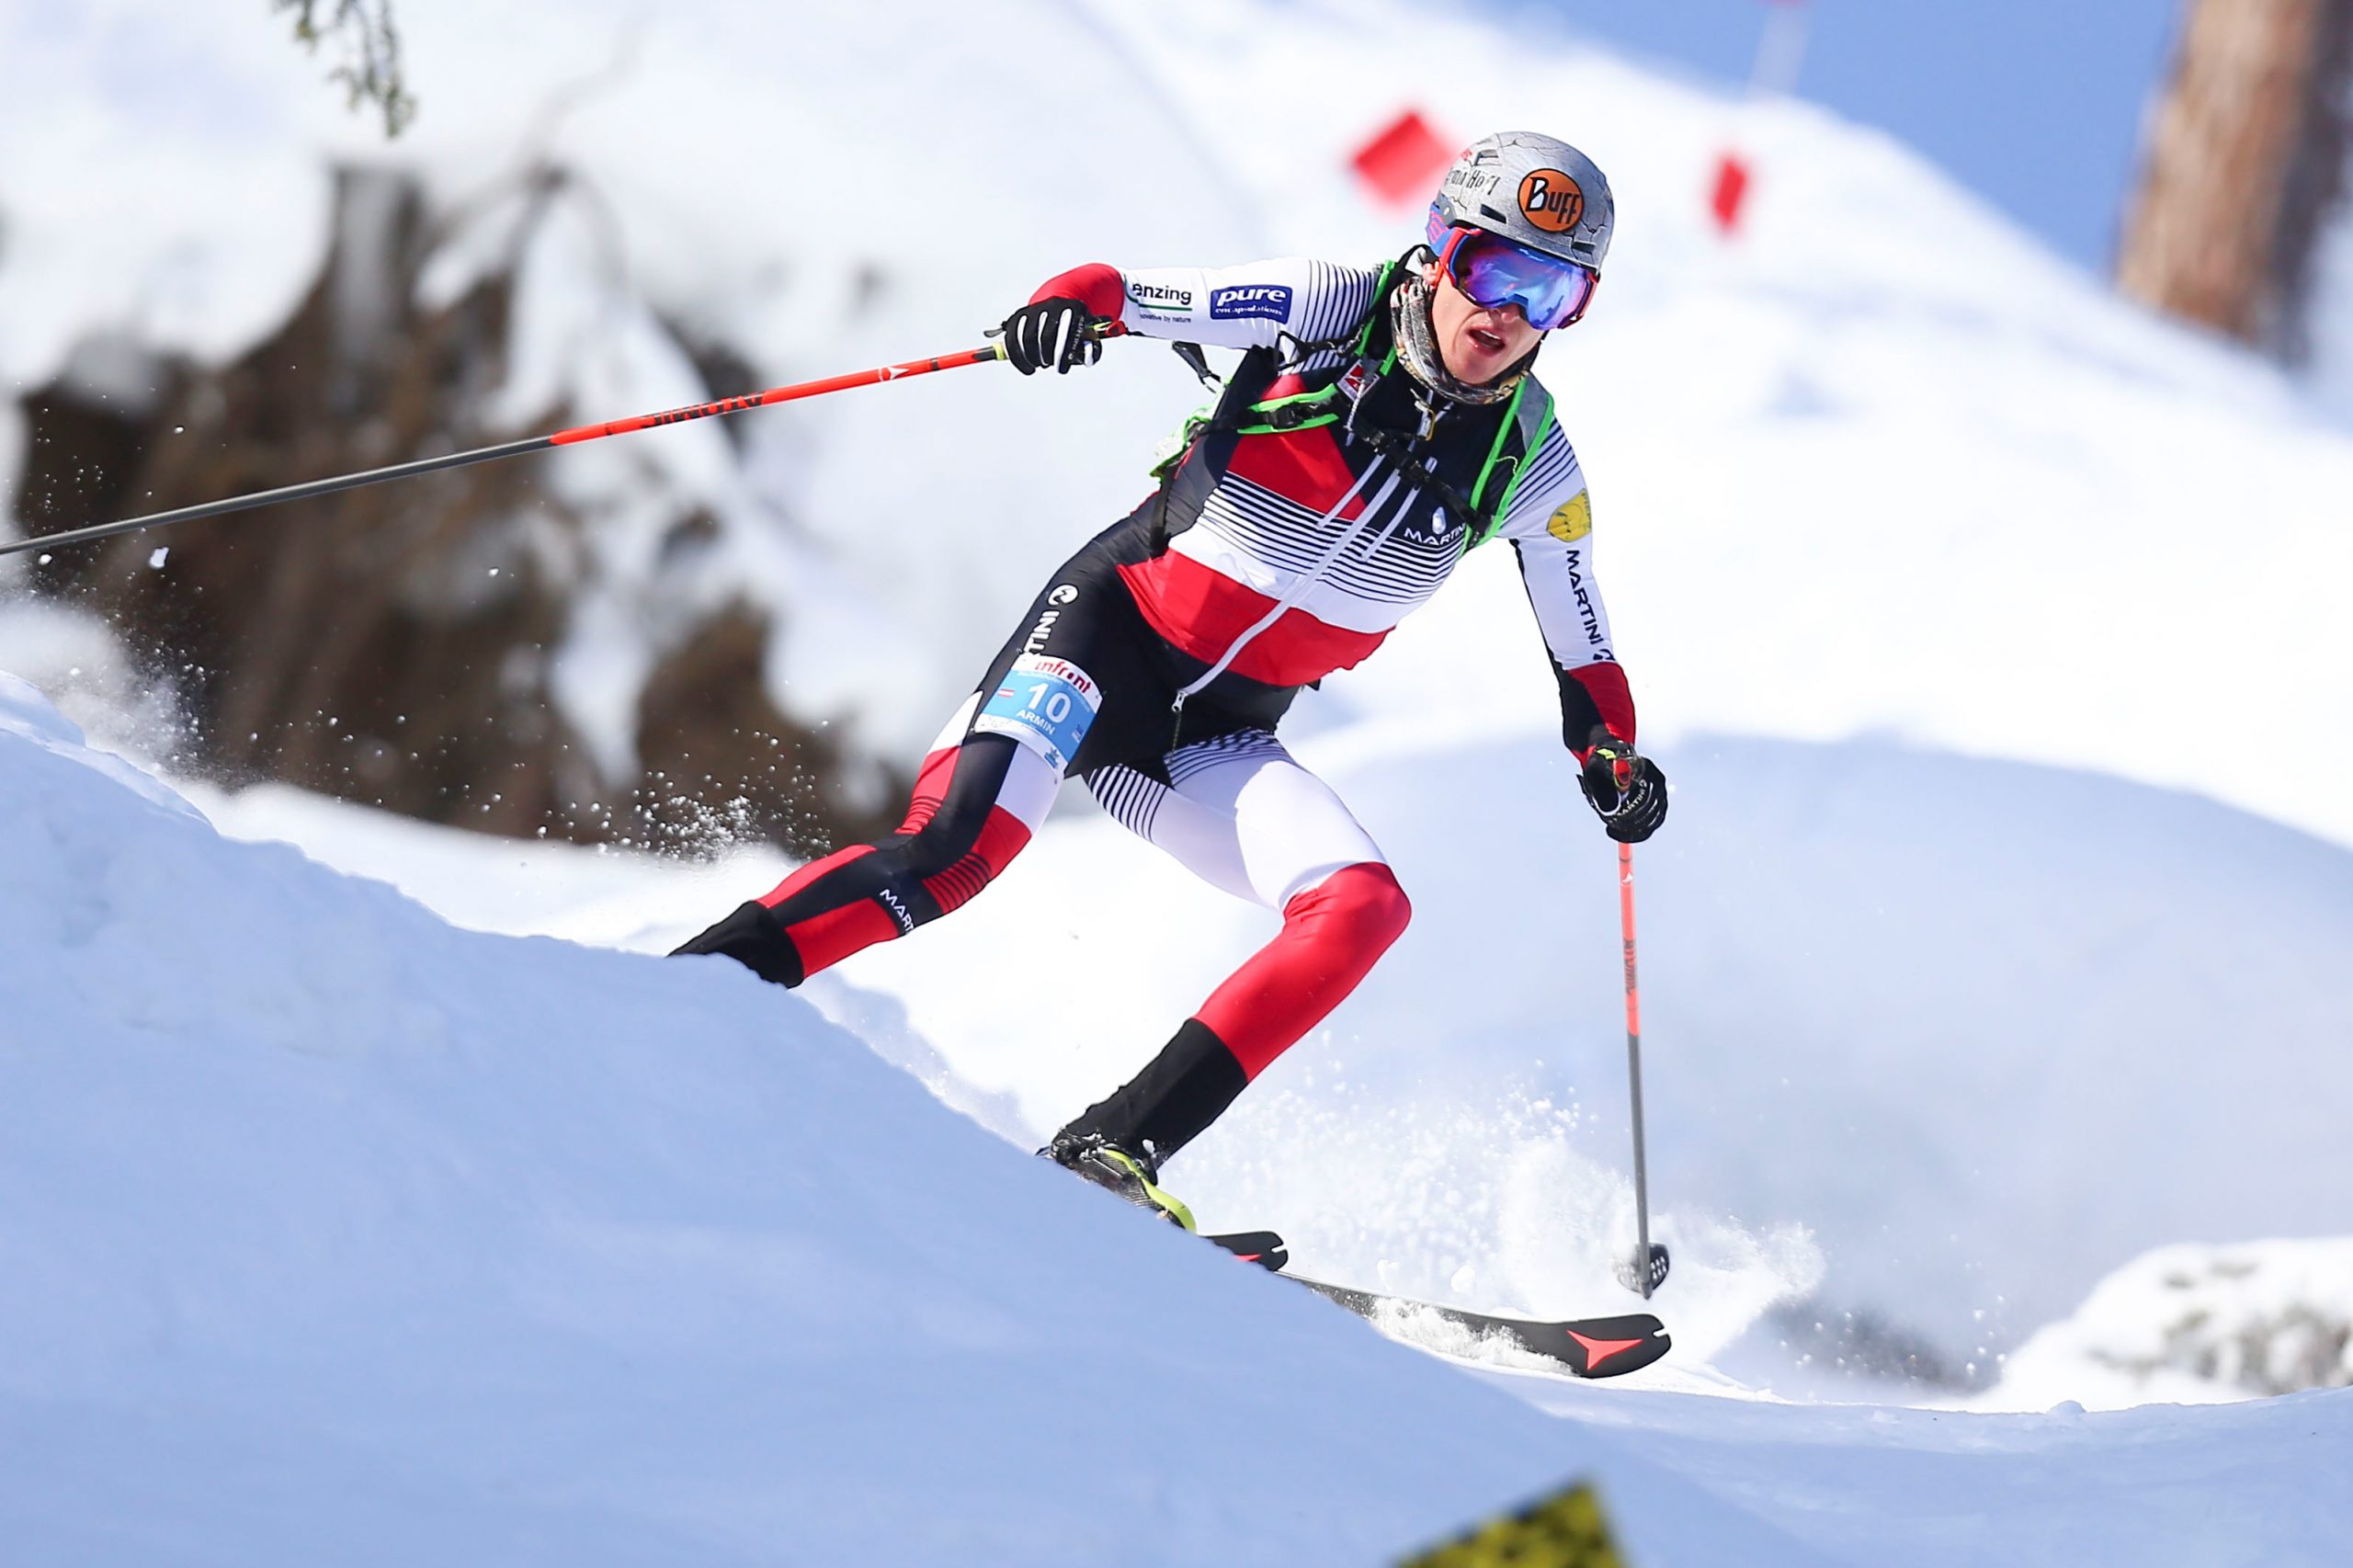 BISCHOFSHOFEN, AUSTRIA - JANUARY 20: Armin Hoefl of Austria during ISMF World Cup Individual Race on January 20, 2019 in Bischofshofen, Austria.